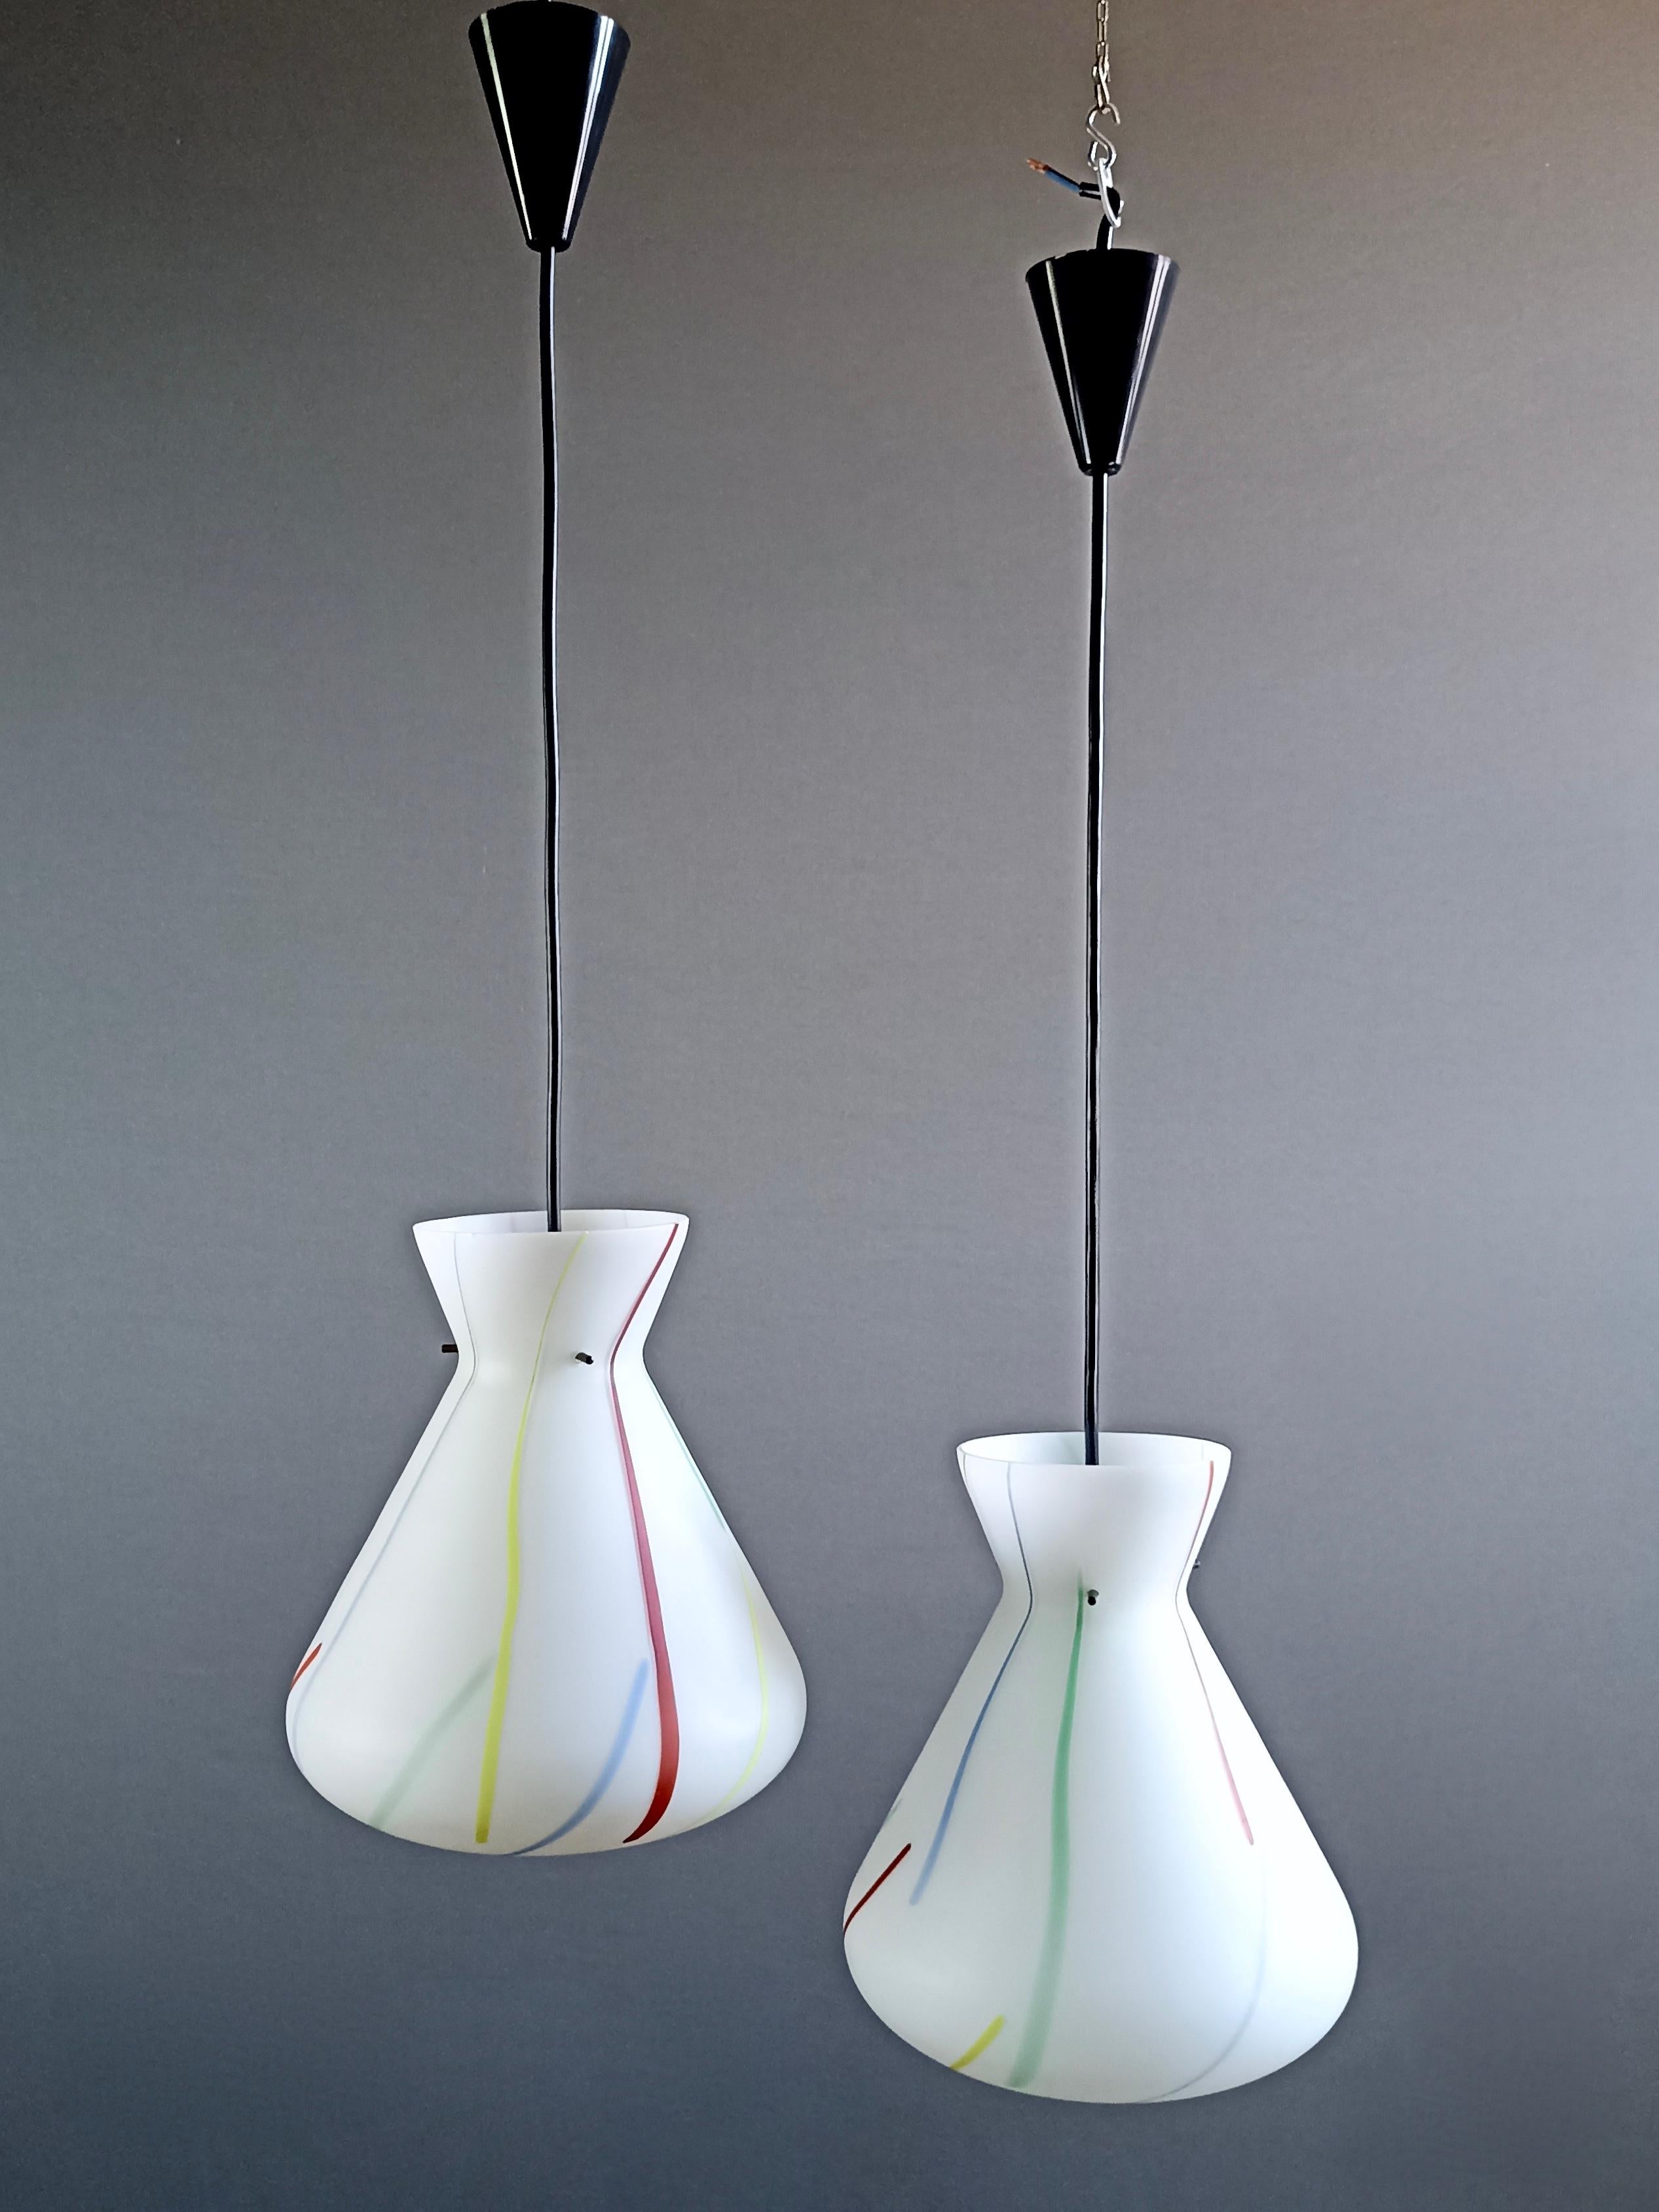 Mid-Century Modern 1950s Stilnovo Style Multi-Color Opaline Glass One-Light Pendant Lamps. A pair. For Sale